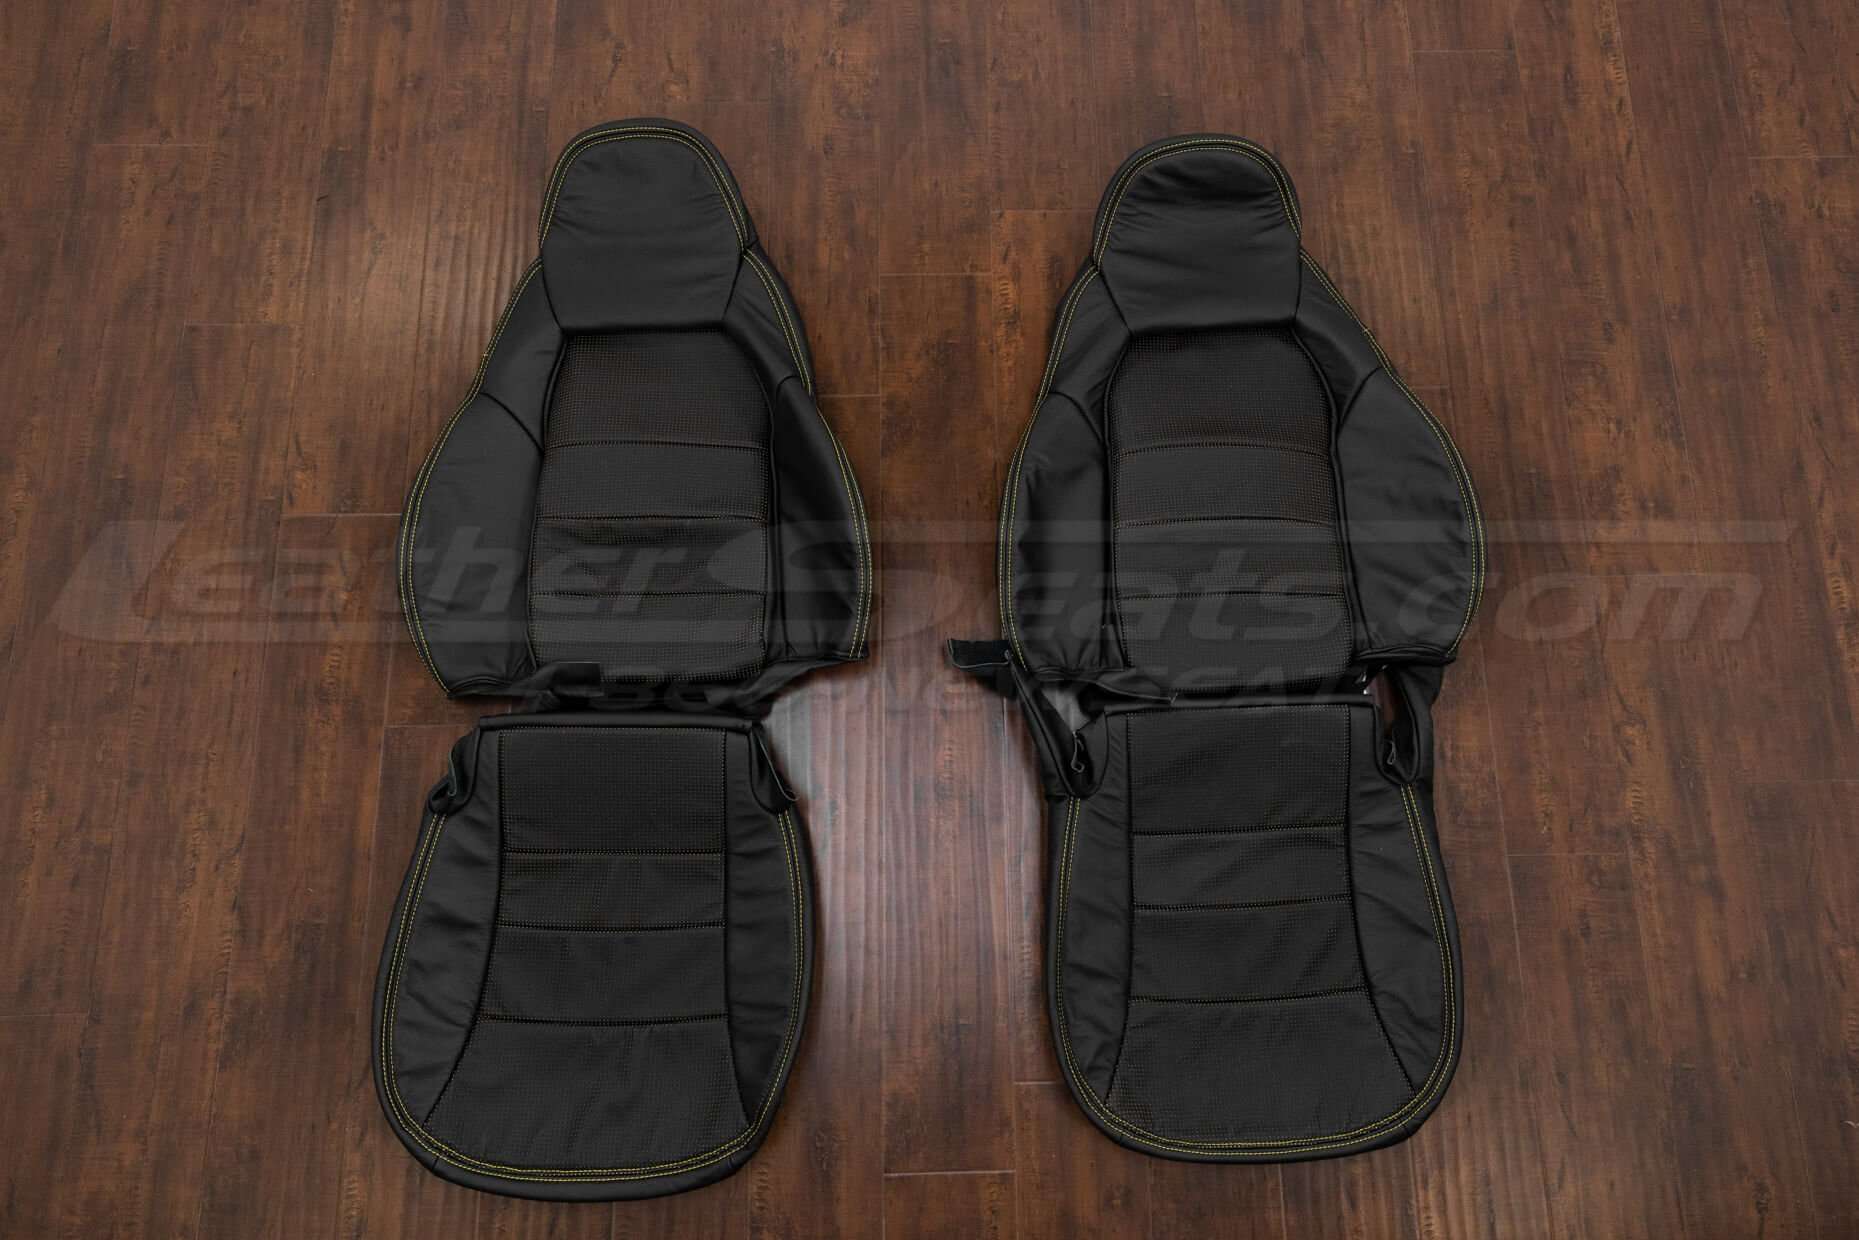 Chevrolet C6 Corvette Leather Seat Kit - Black & Piazza Yellow - Front seat upholstery